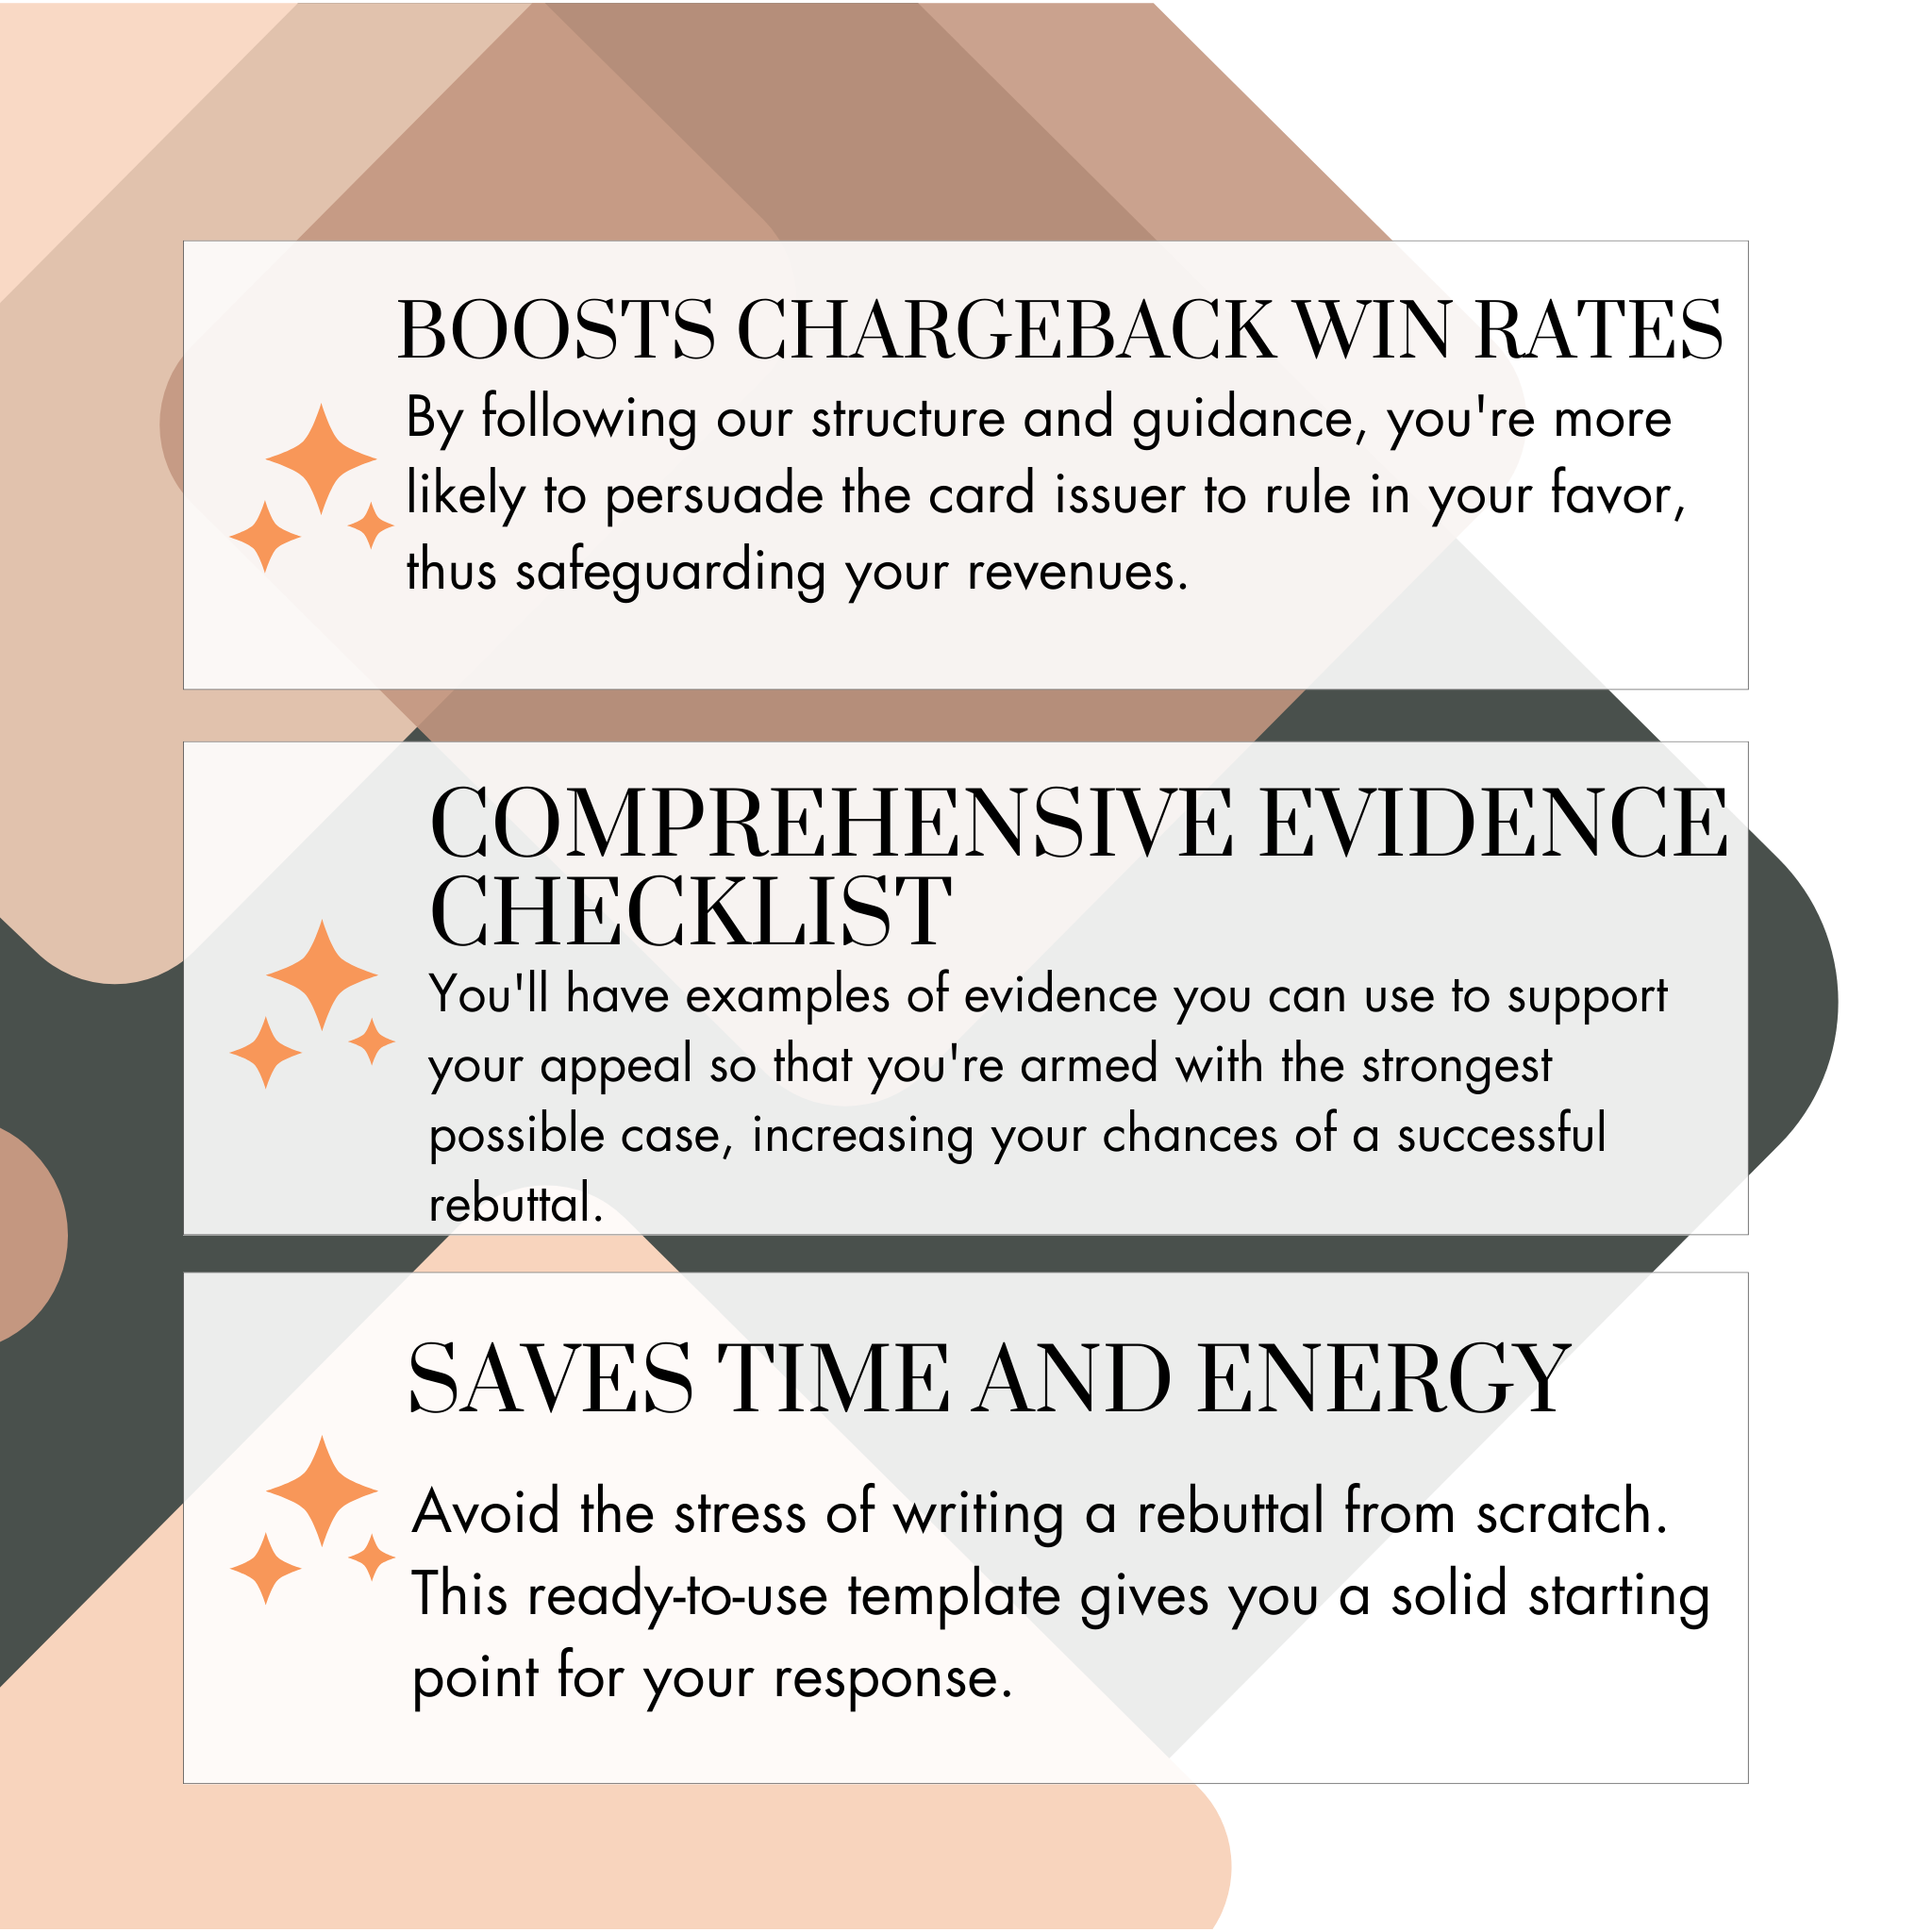 Maximize Your Chargeback Win Rate: 5 Tips From the Experts